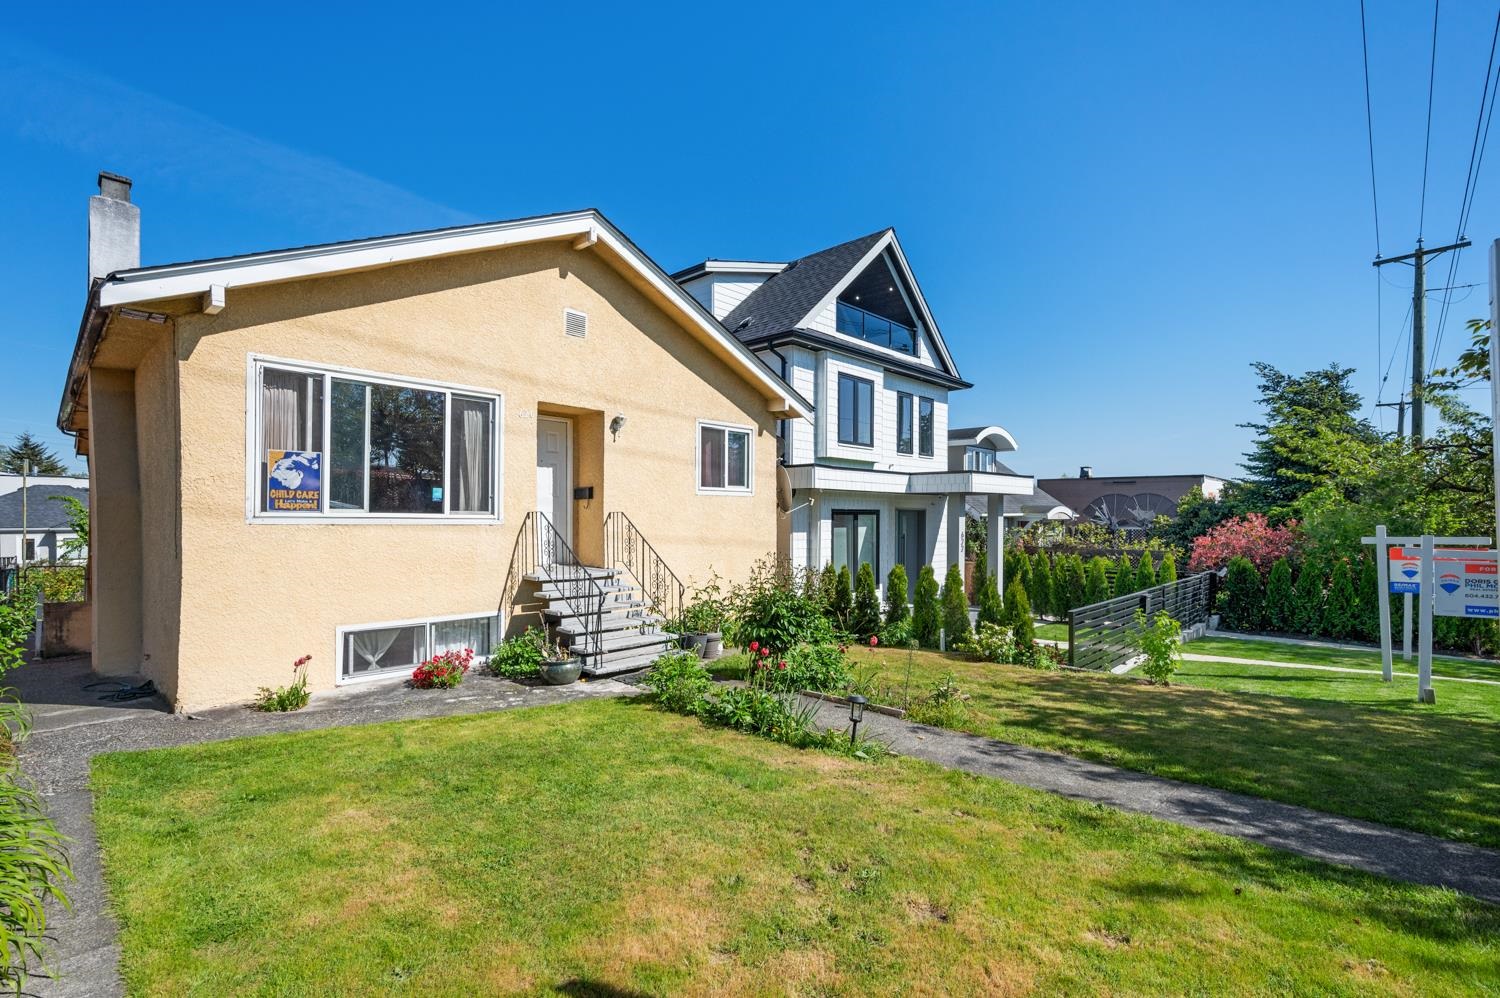 Listing image of 620 SLOCAN STREET